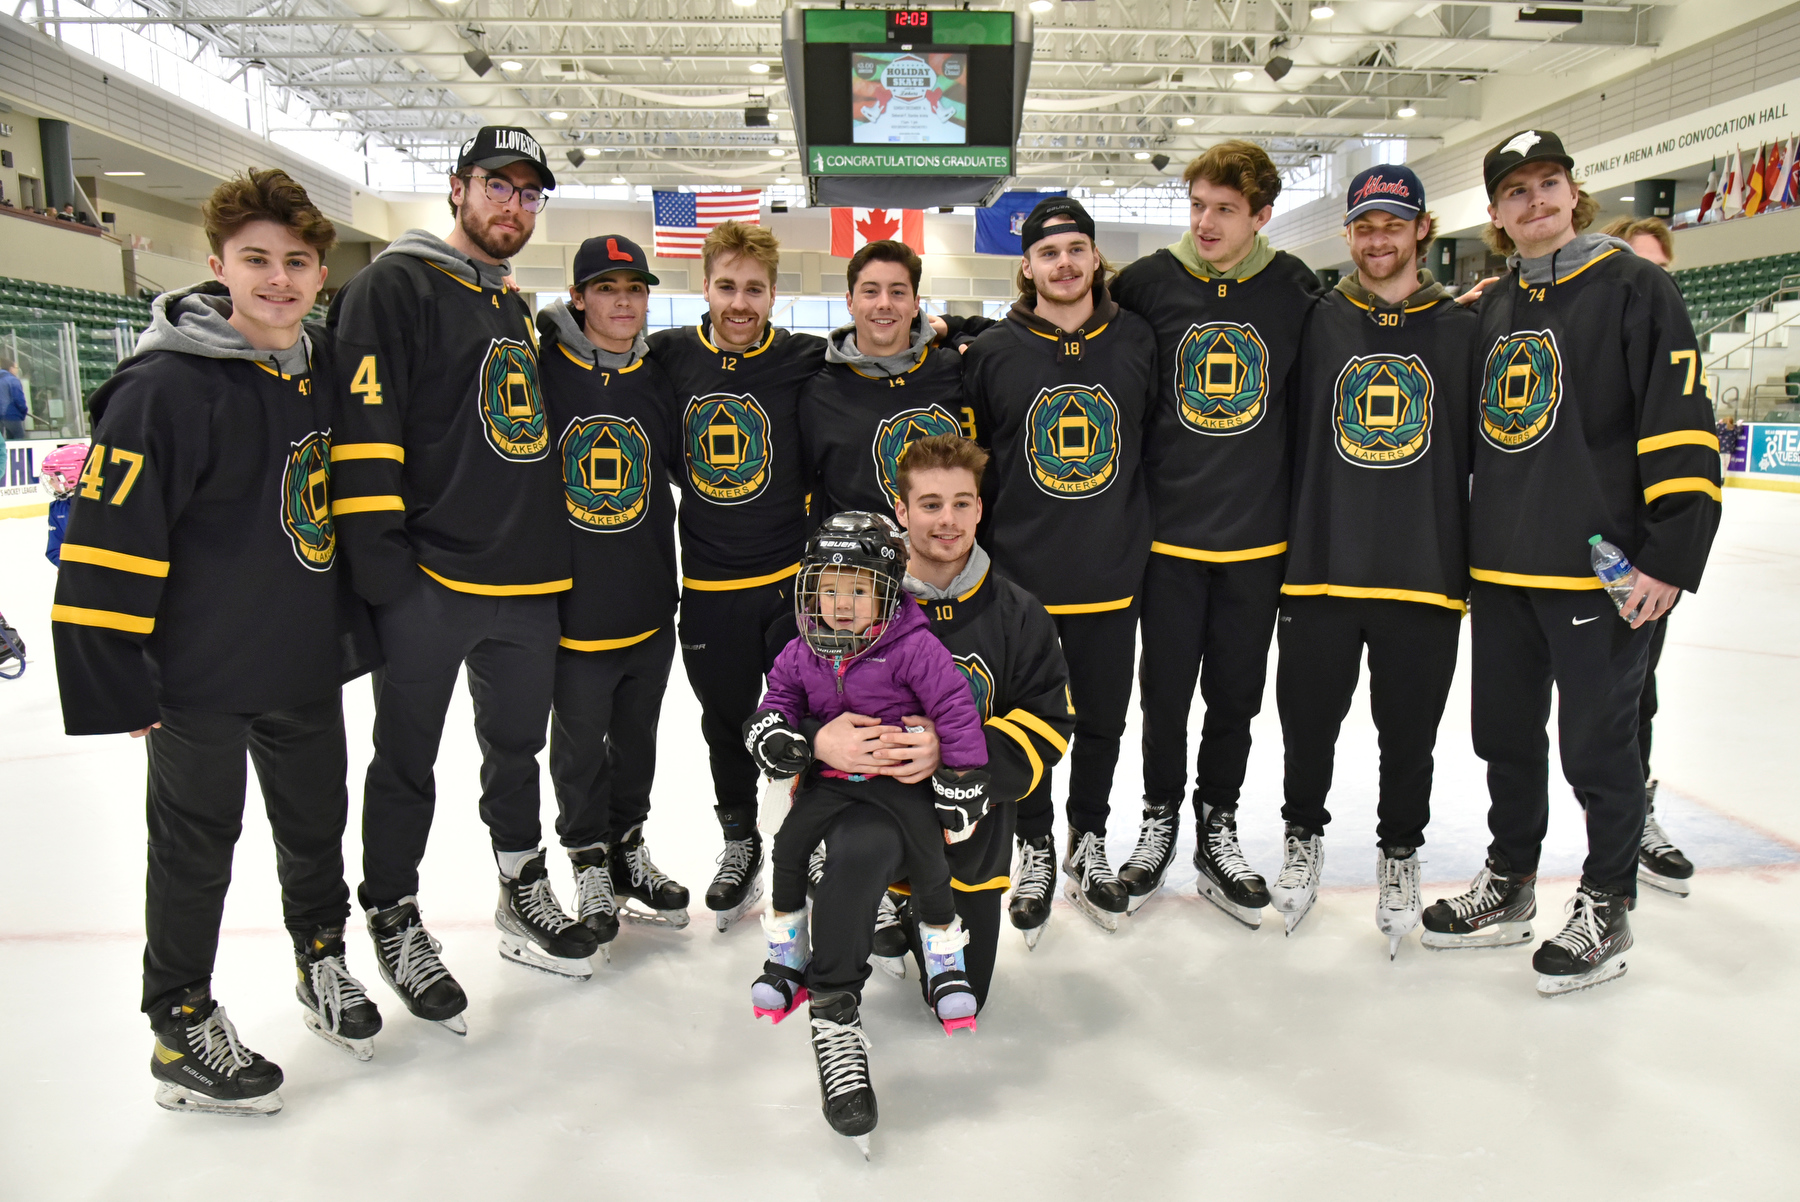 Laker Daniel Colabufo (#10), center, takes a moment to gather for a photo with his niece Mia Colabufo, 3, and other members of the men's hockey team during the popular annual Holiday Skate with the Lakers held Dec. 4.